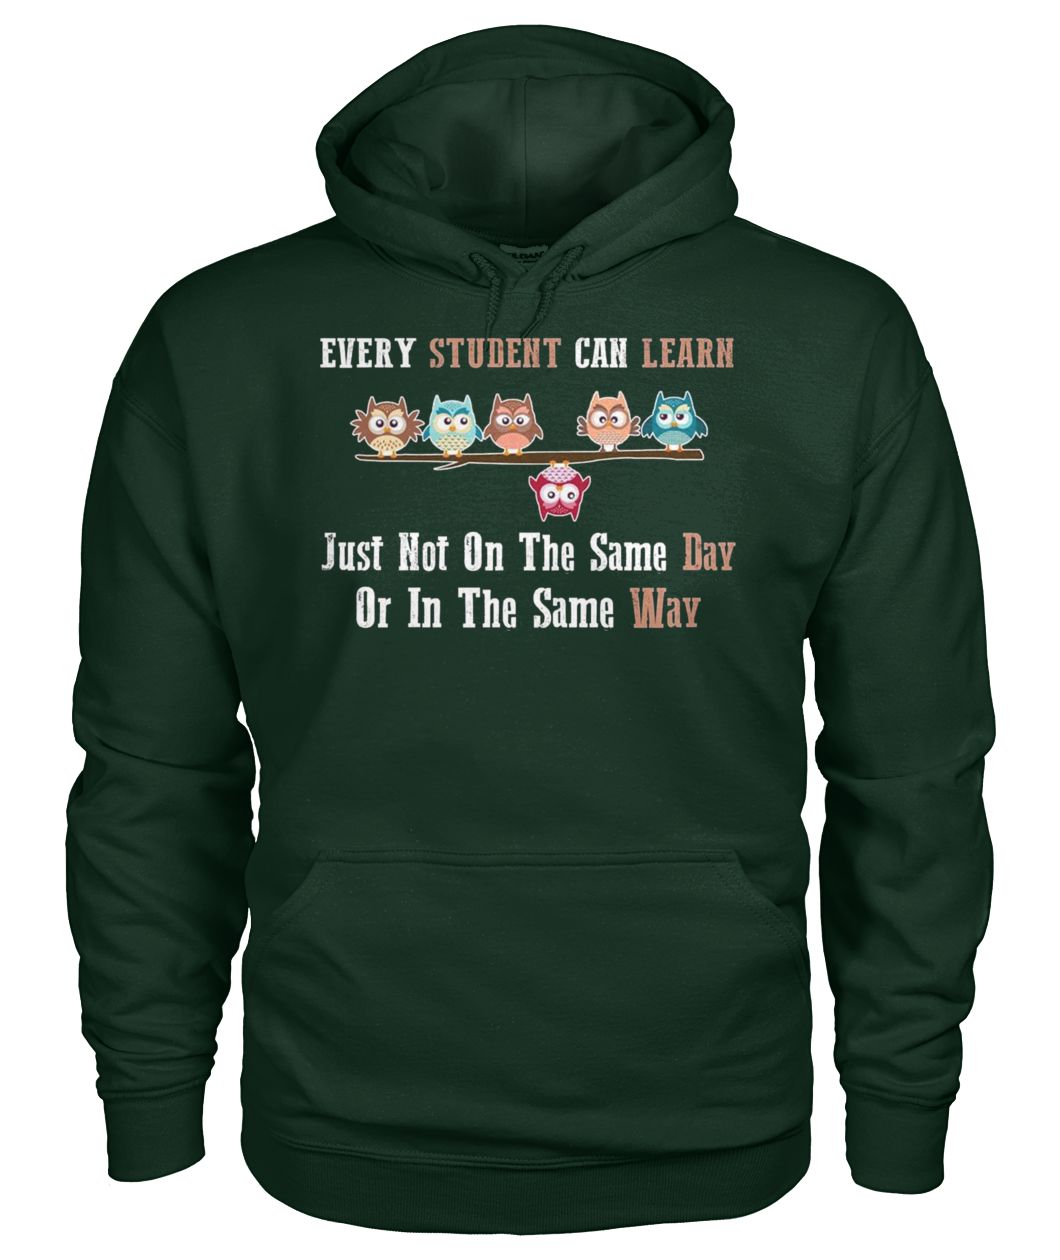 Every student can learn just not on the same day or in the same way owl gildan hoodie